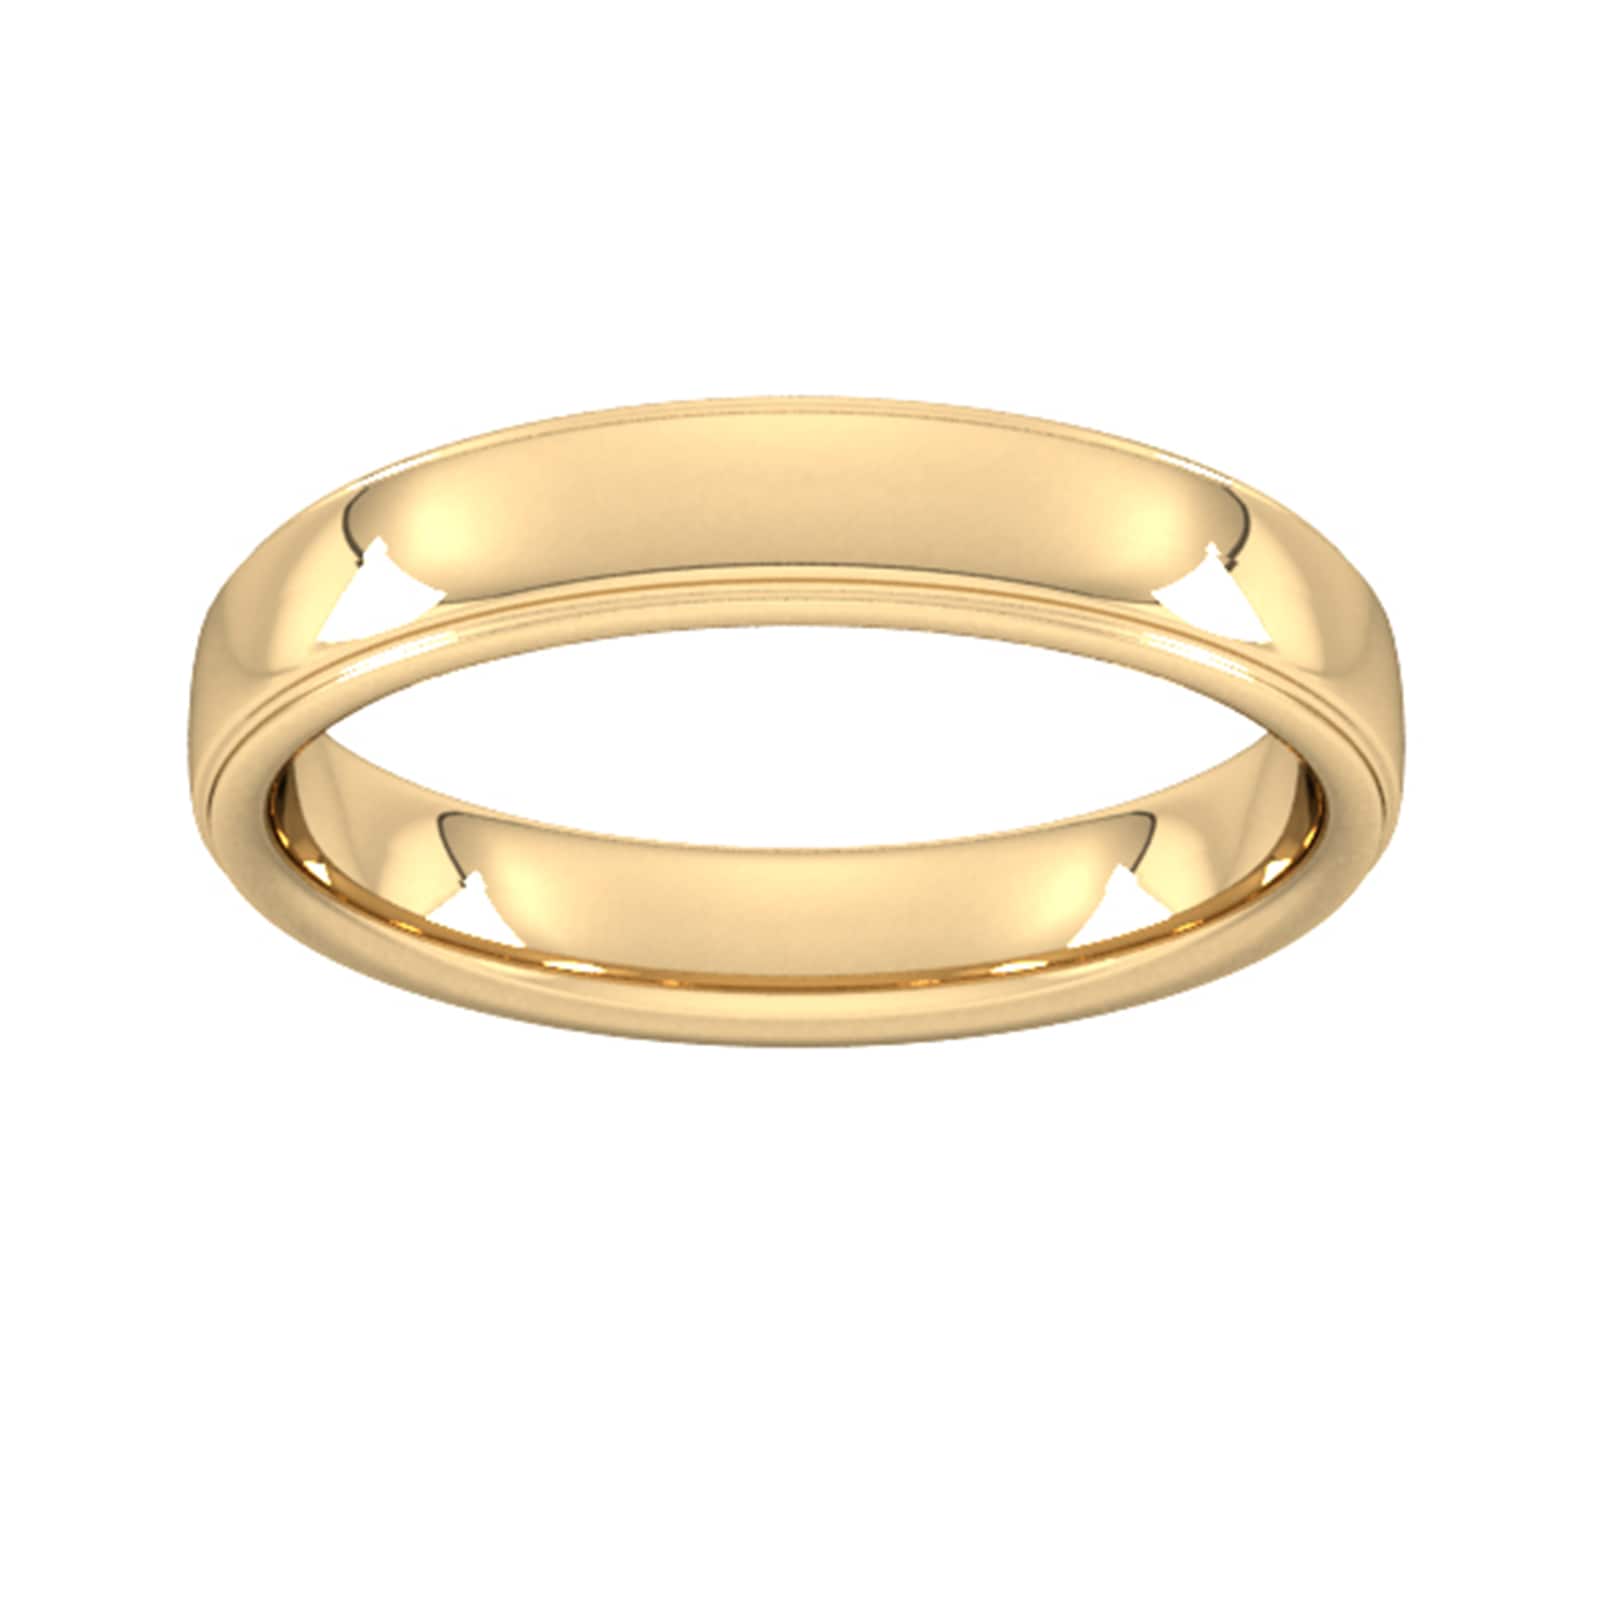 4mm Slight Court Heavy Polished Finish With Grooves Wedding Ring In 18 Carat Yellow Gold - Ring Size L